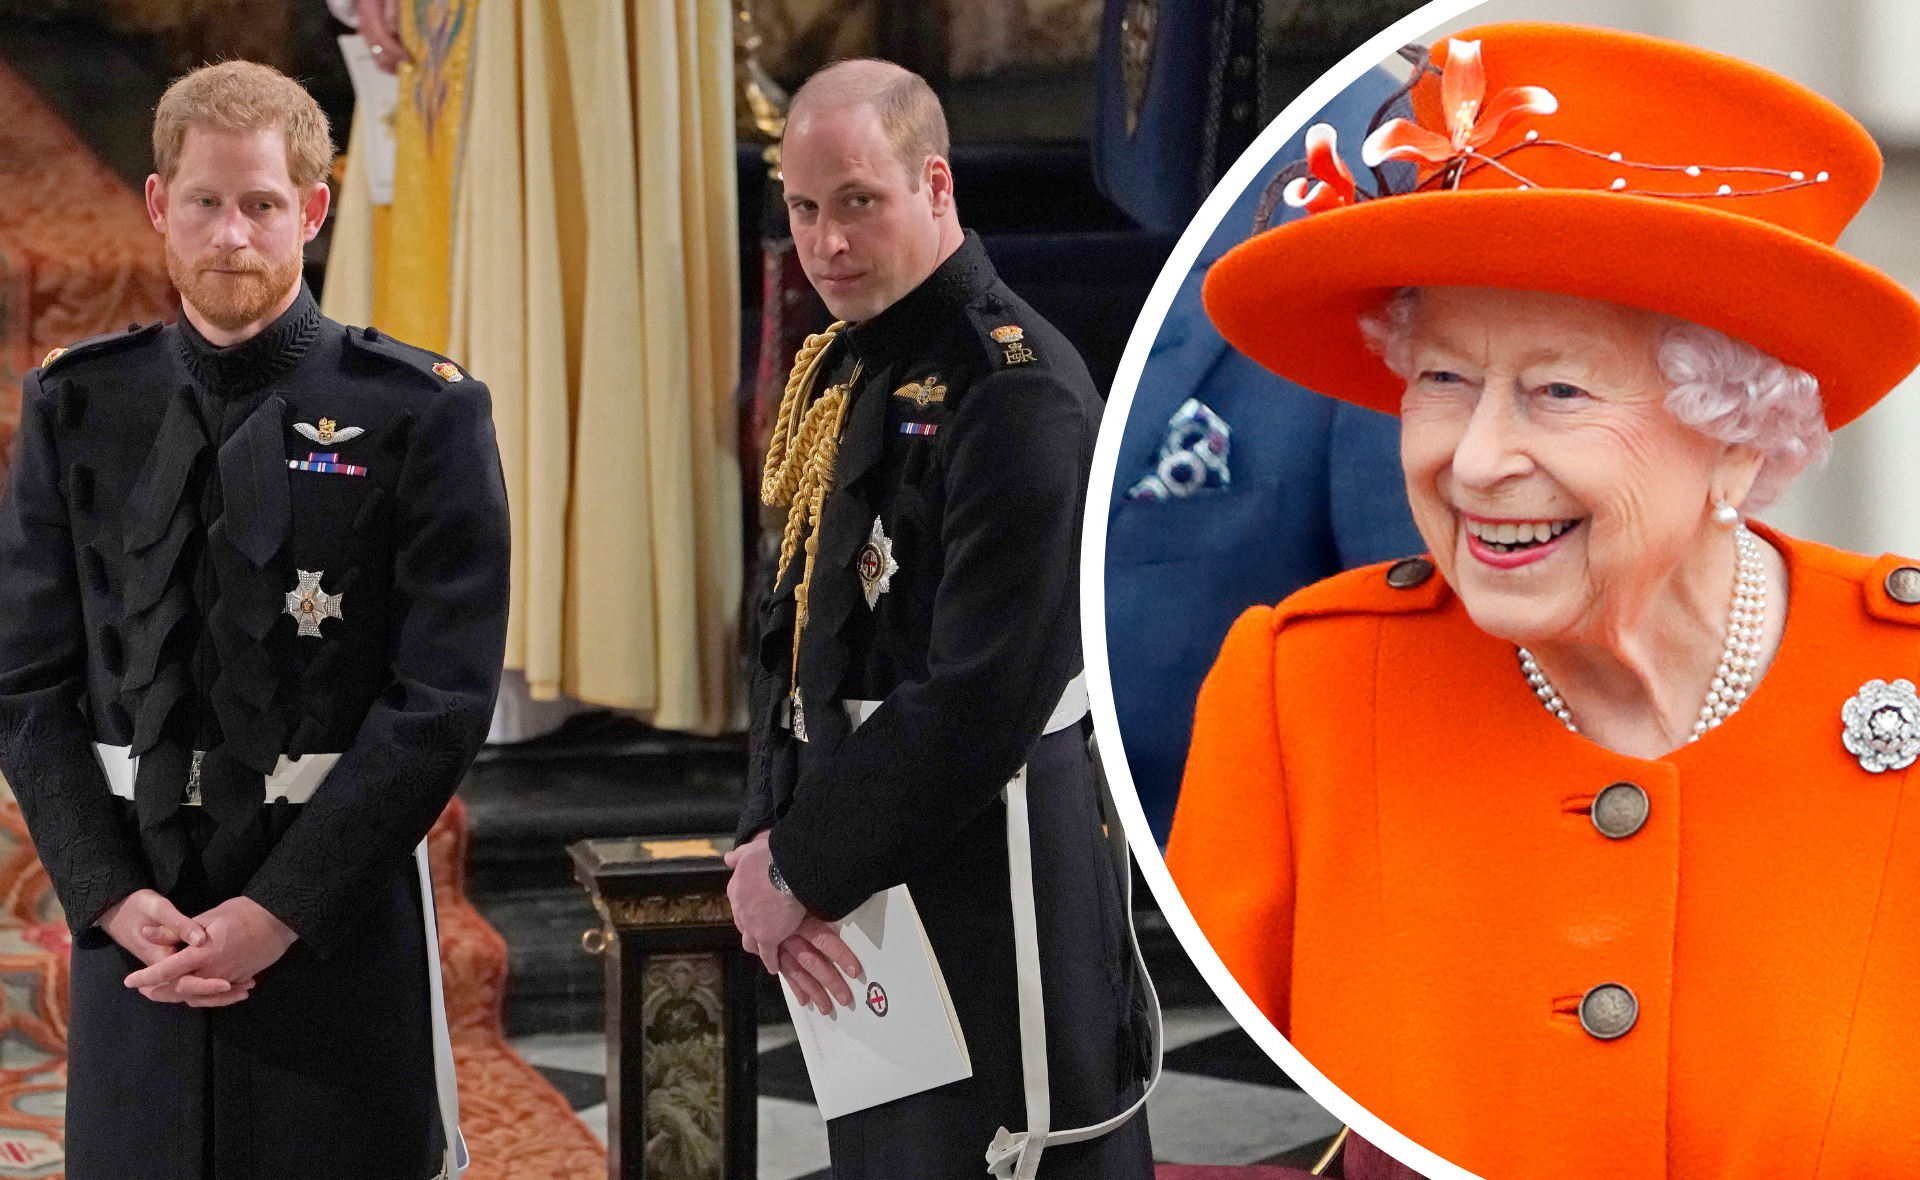 The Queen’s one strict rule for her grandchildren revealed